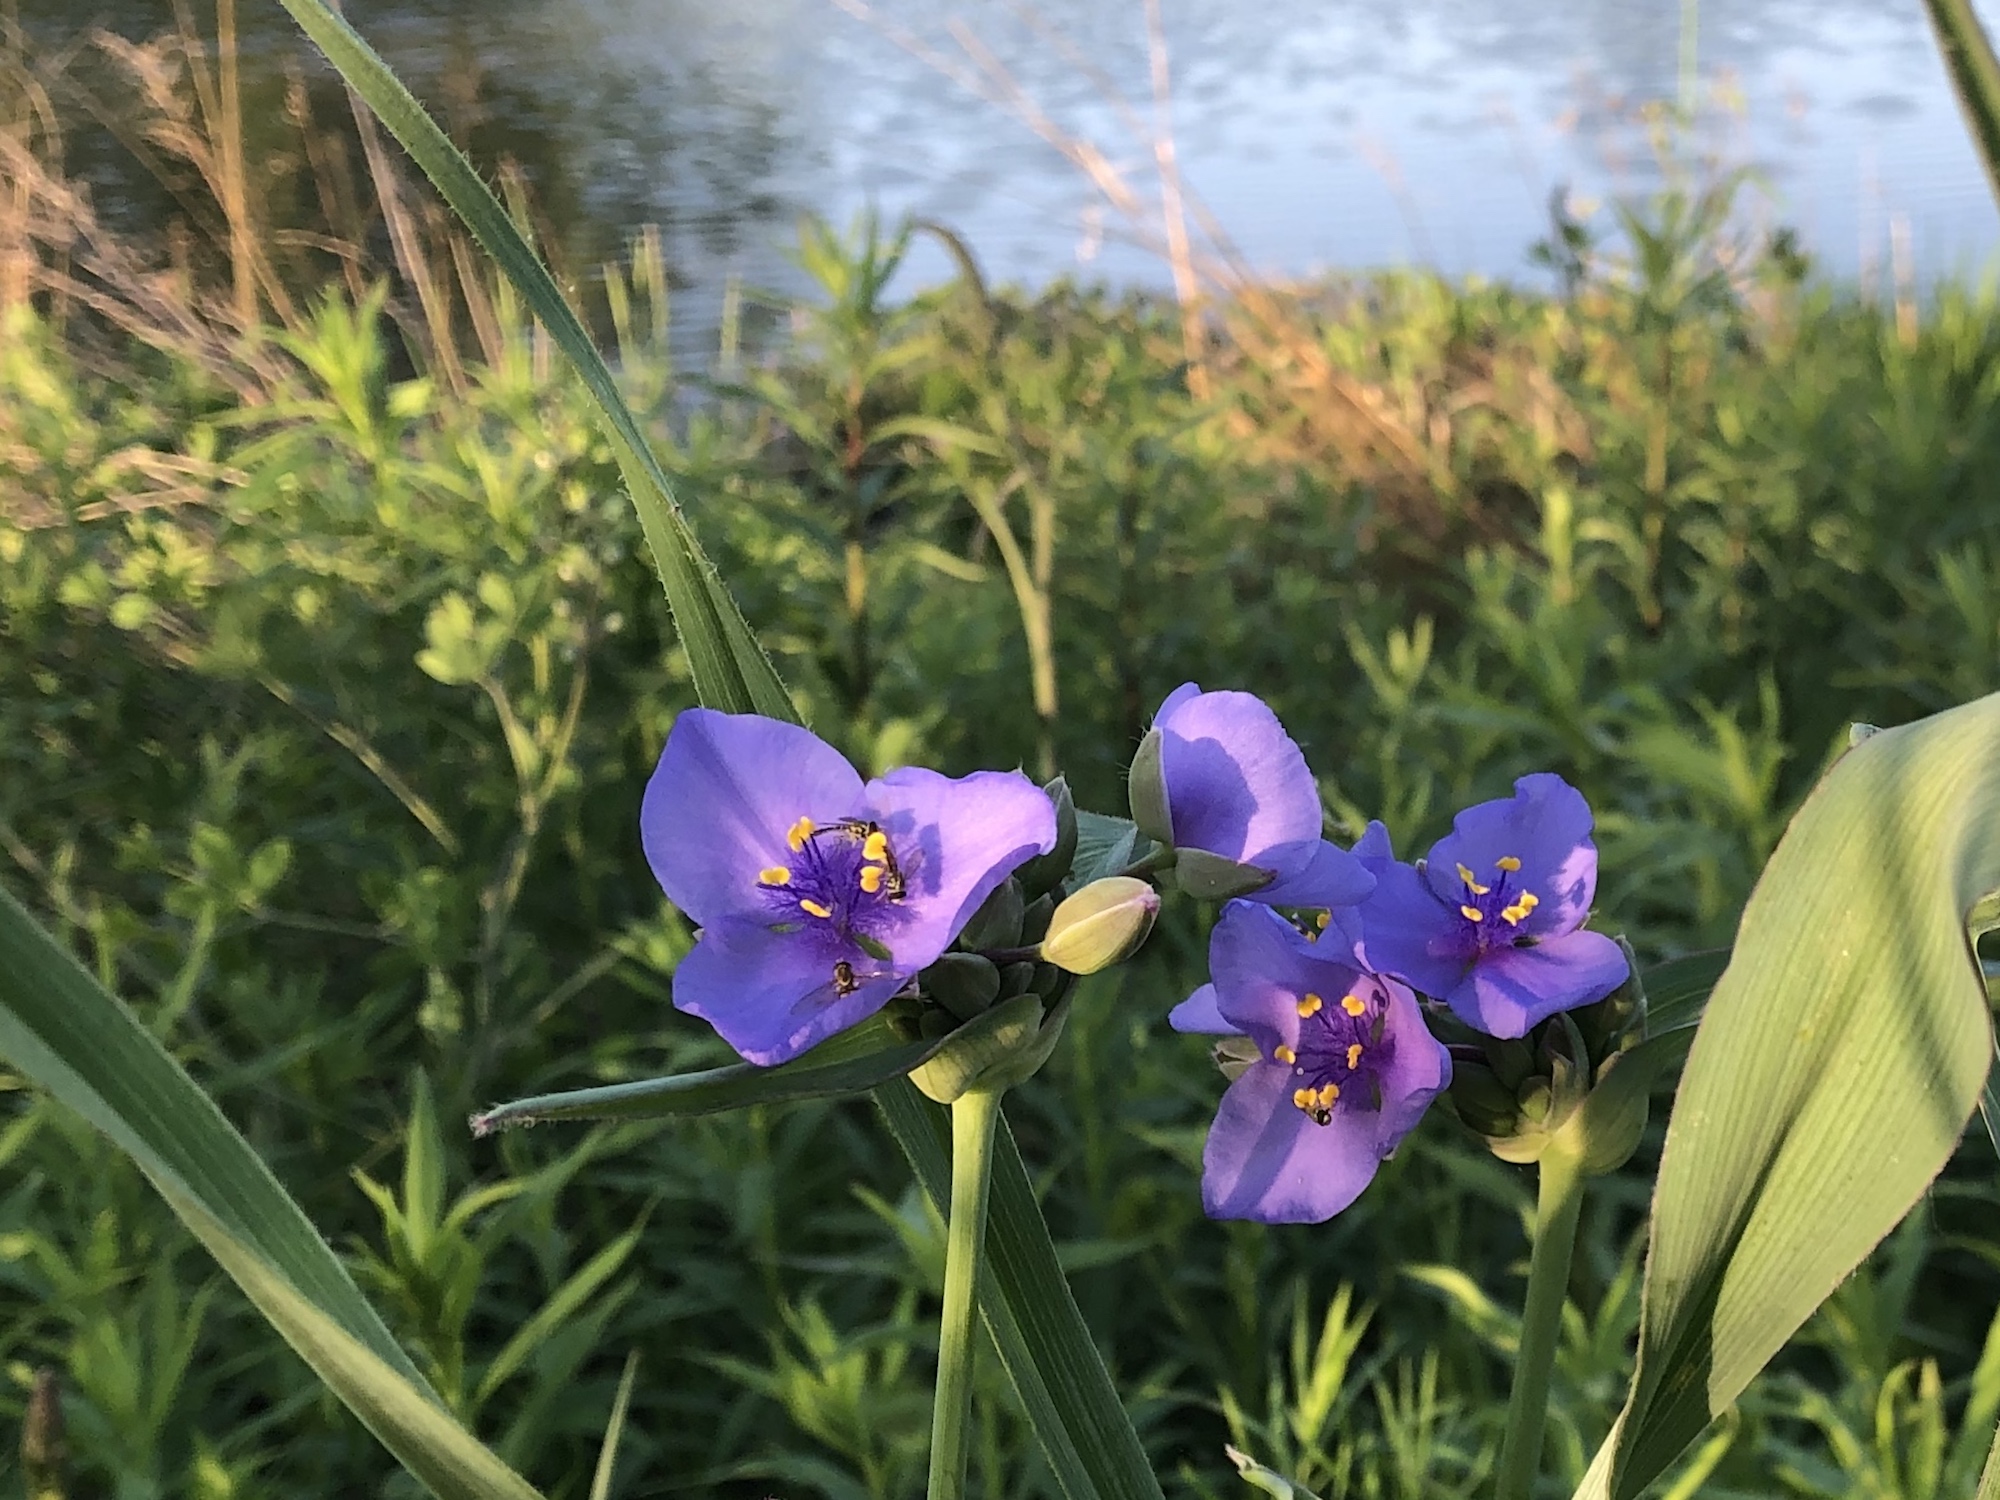 Spiderwort blooming on the bank of the retaining pond on June 2, 2020.